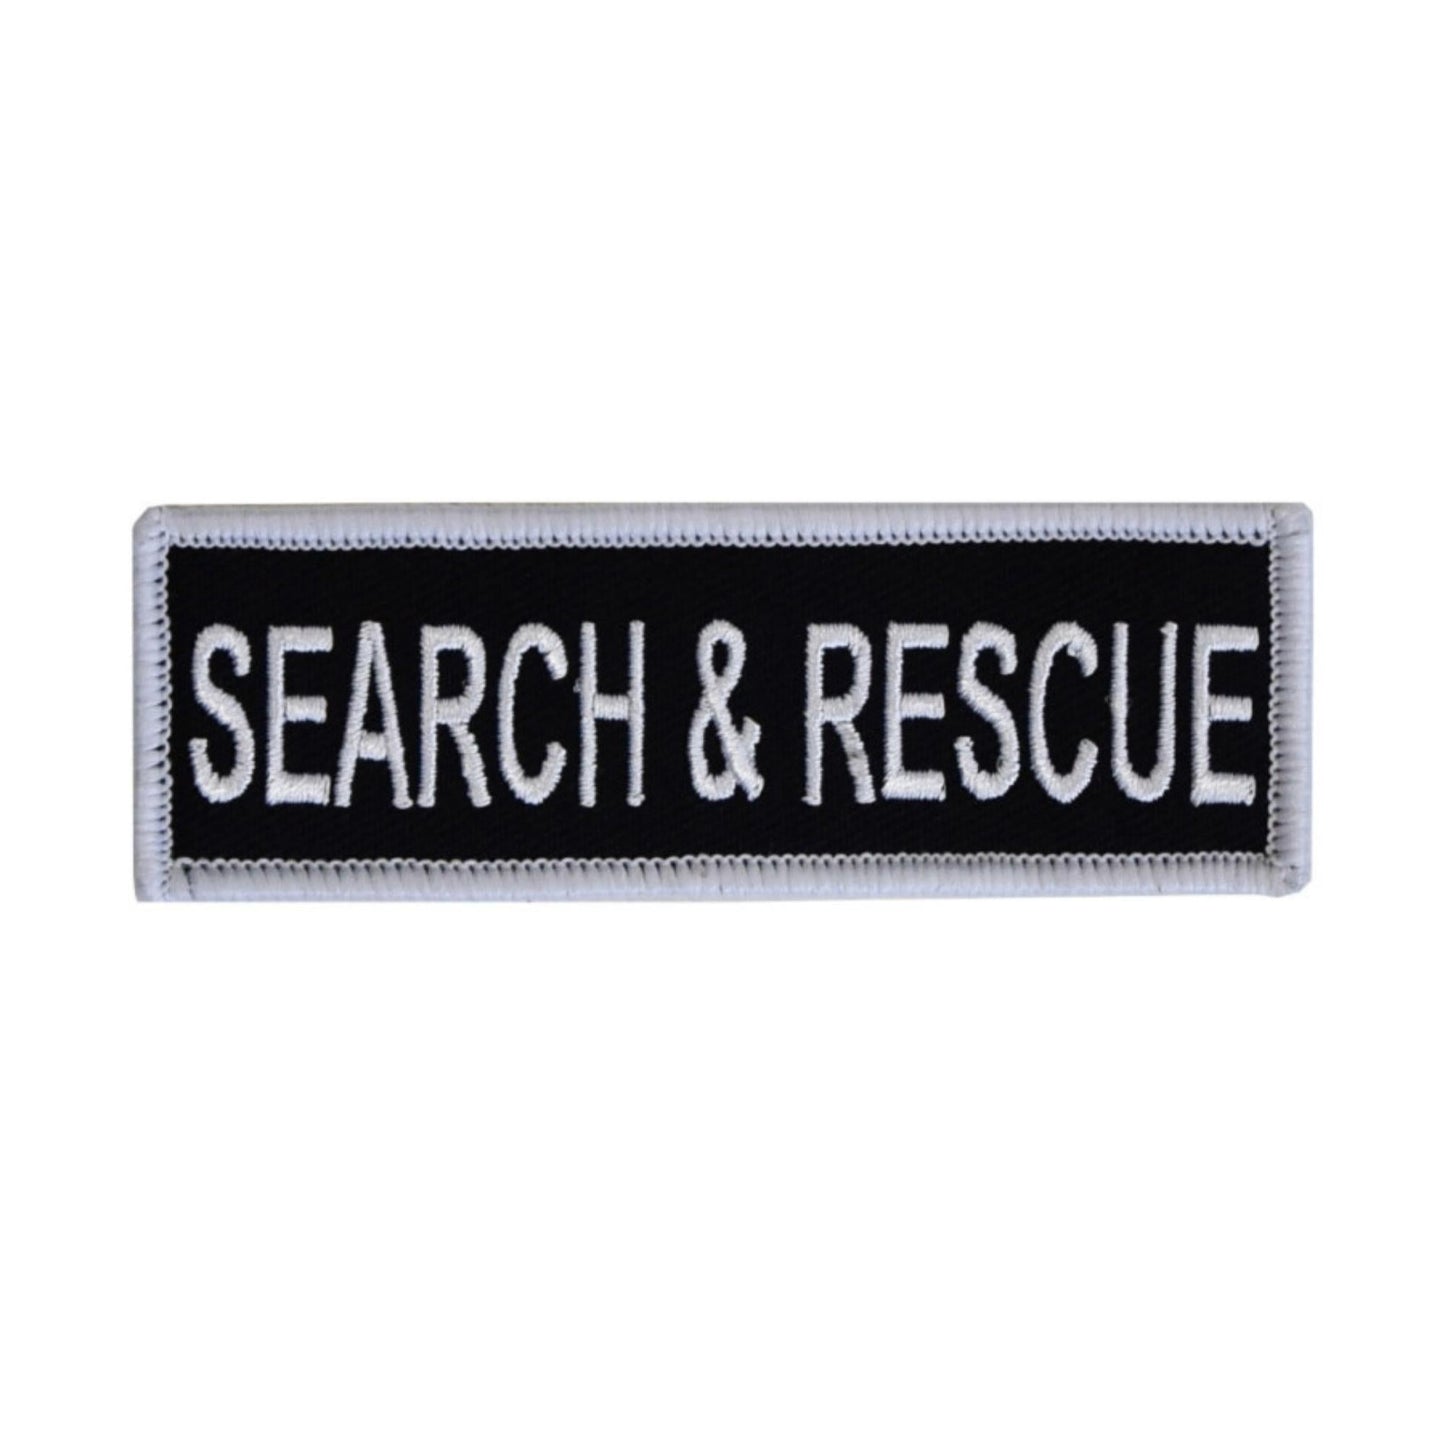 Boss Dog Tactical Harness Patch Search & Rescue, 6ea/Small